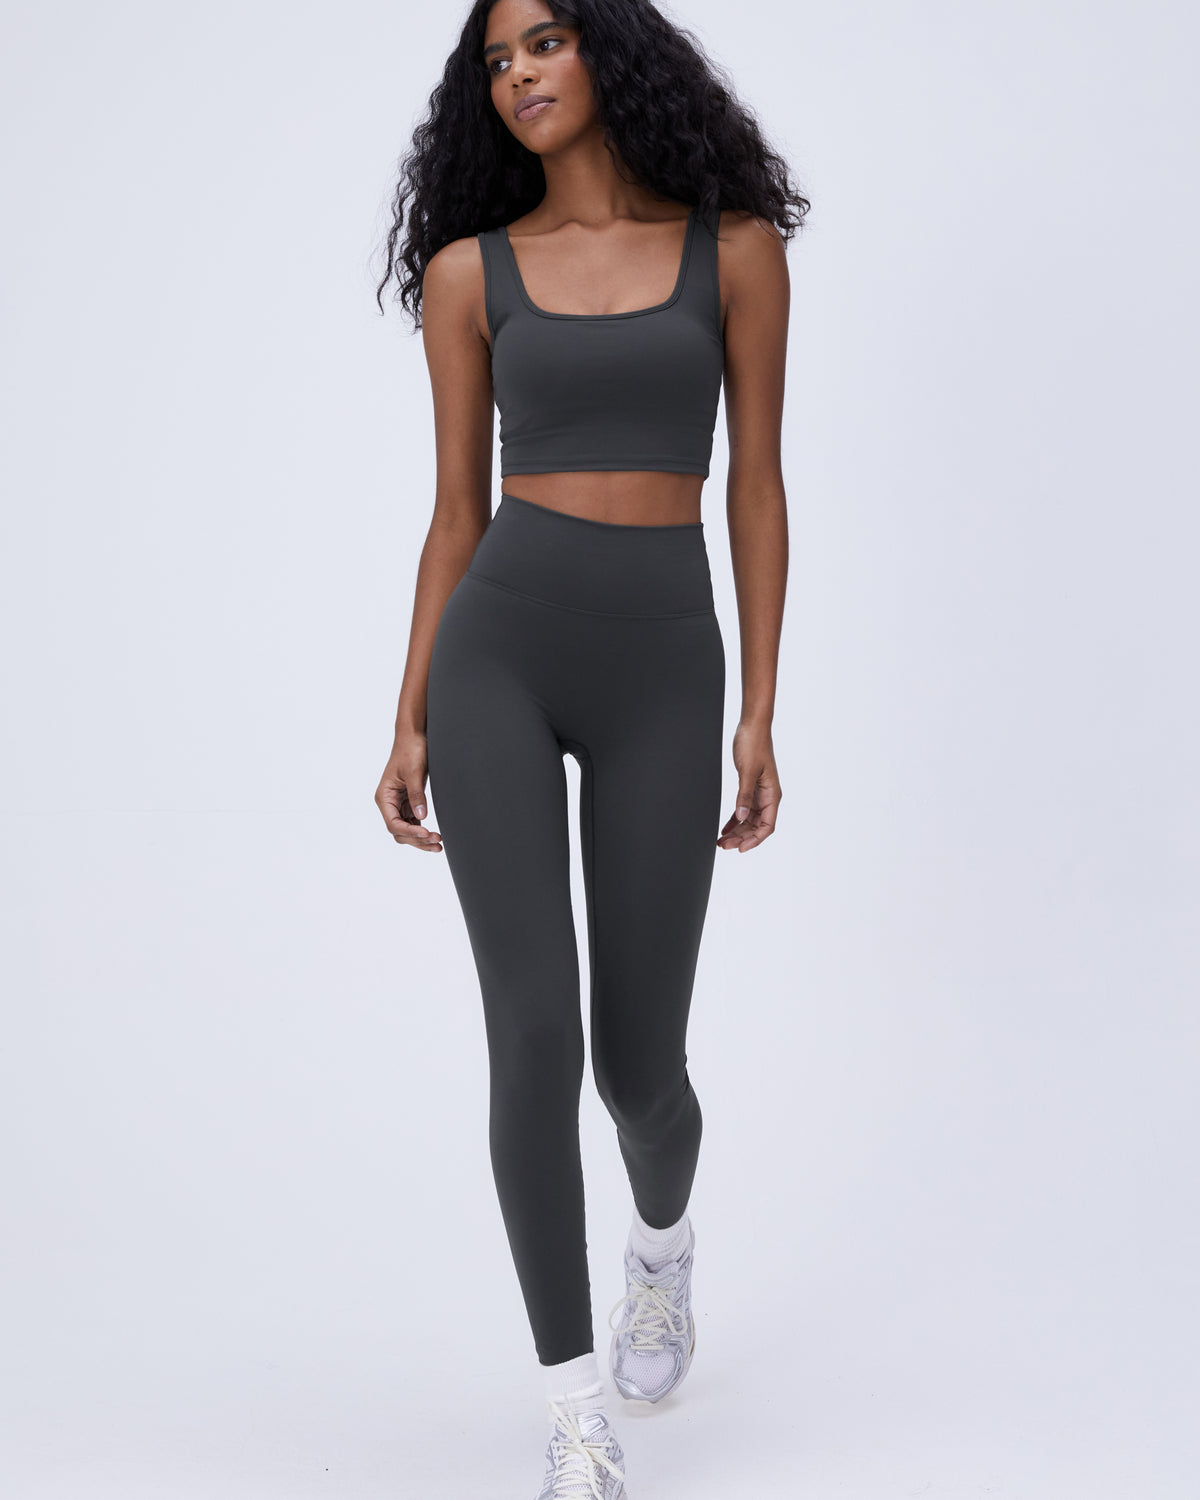 Fitness leggings in graphite and black color